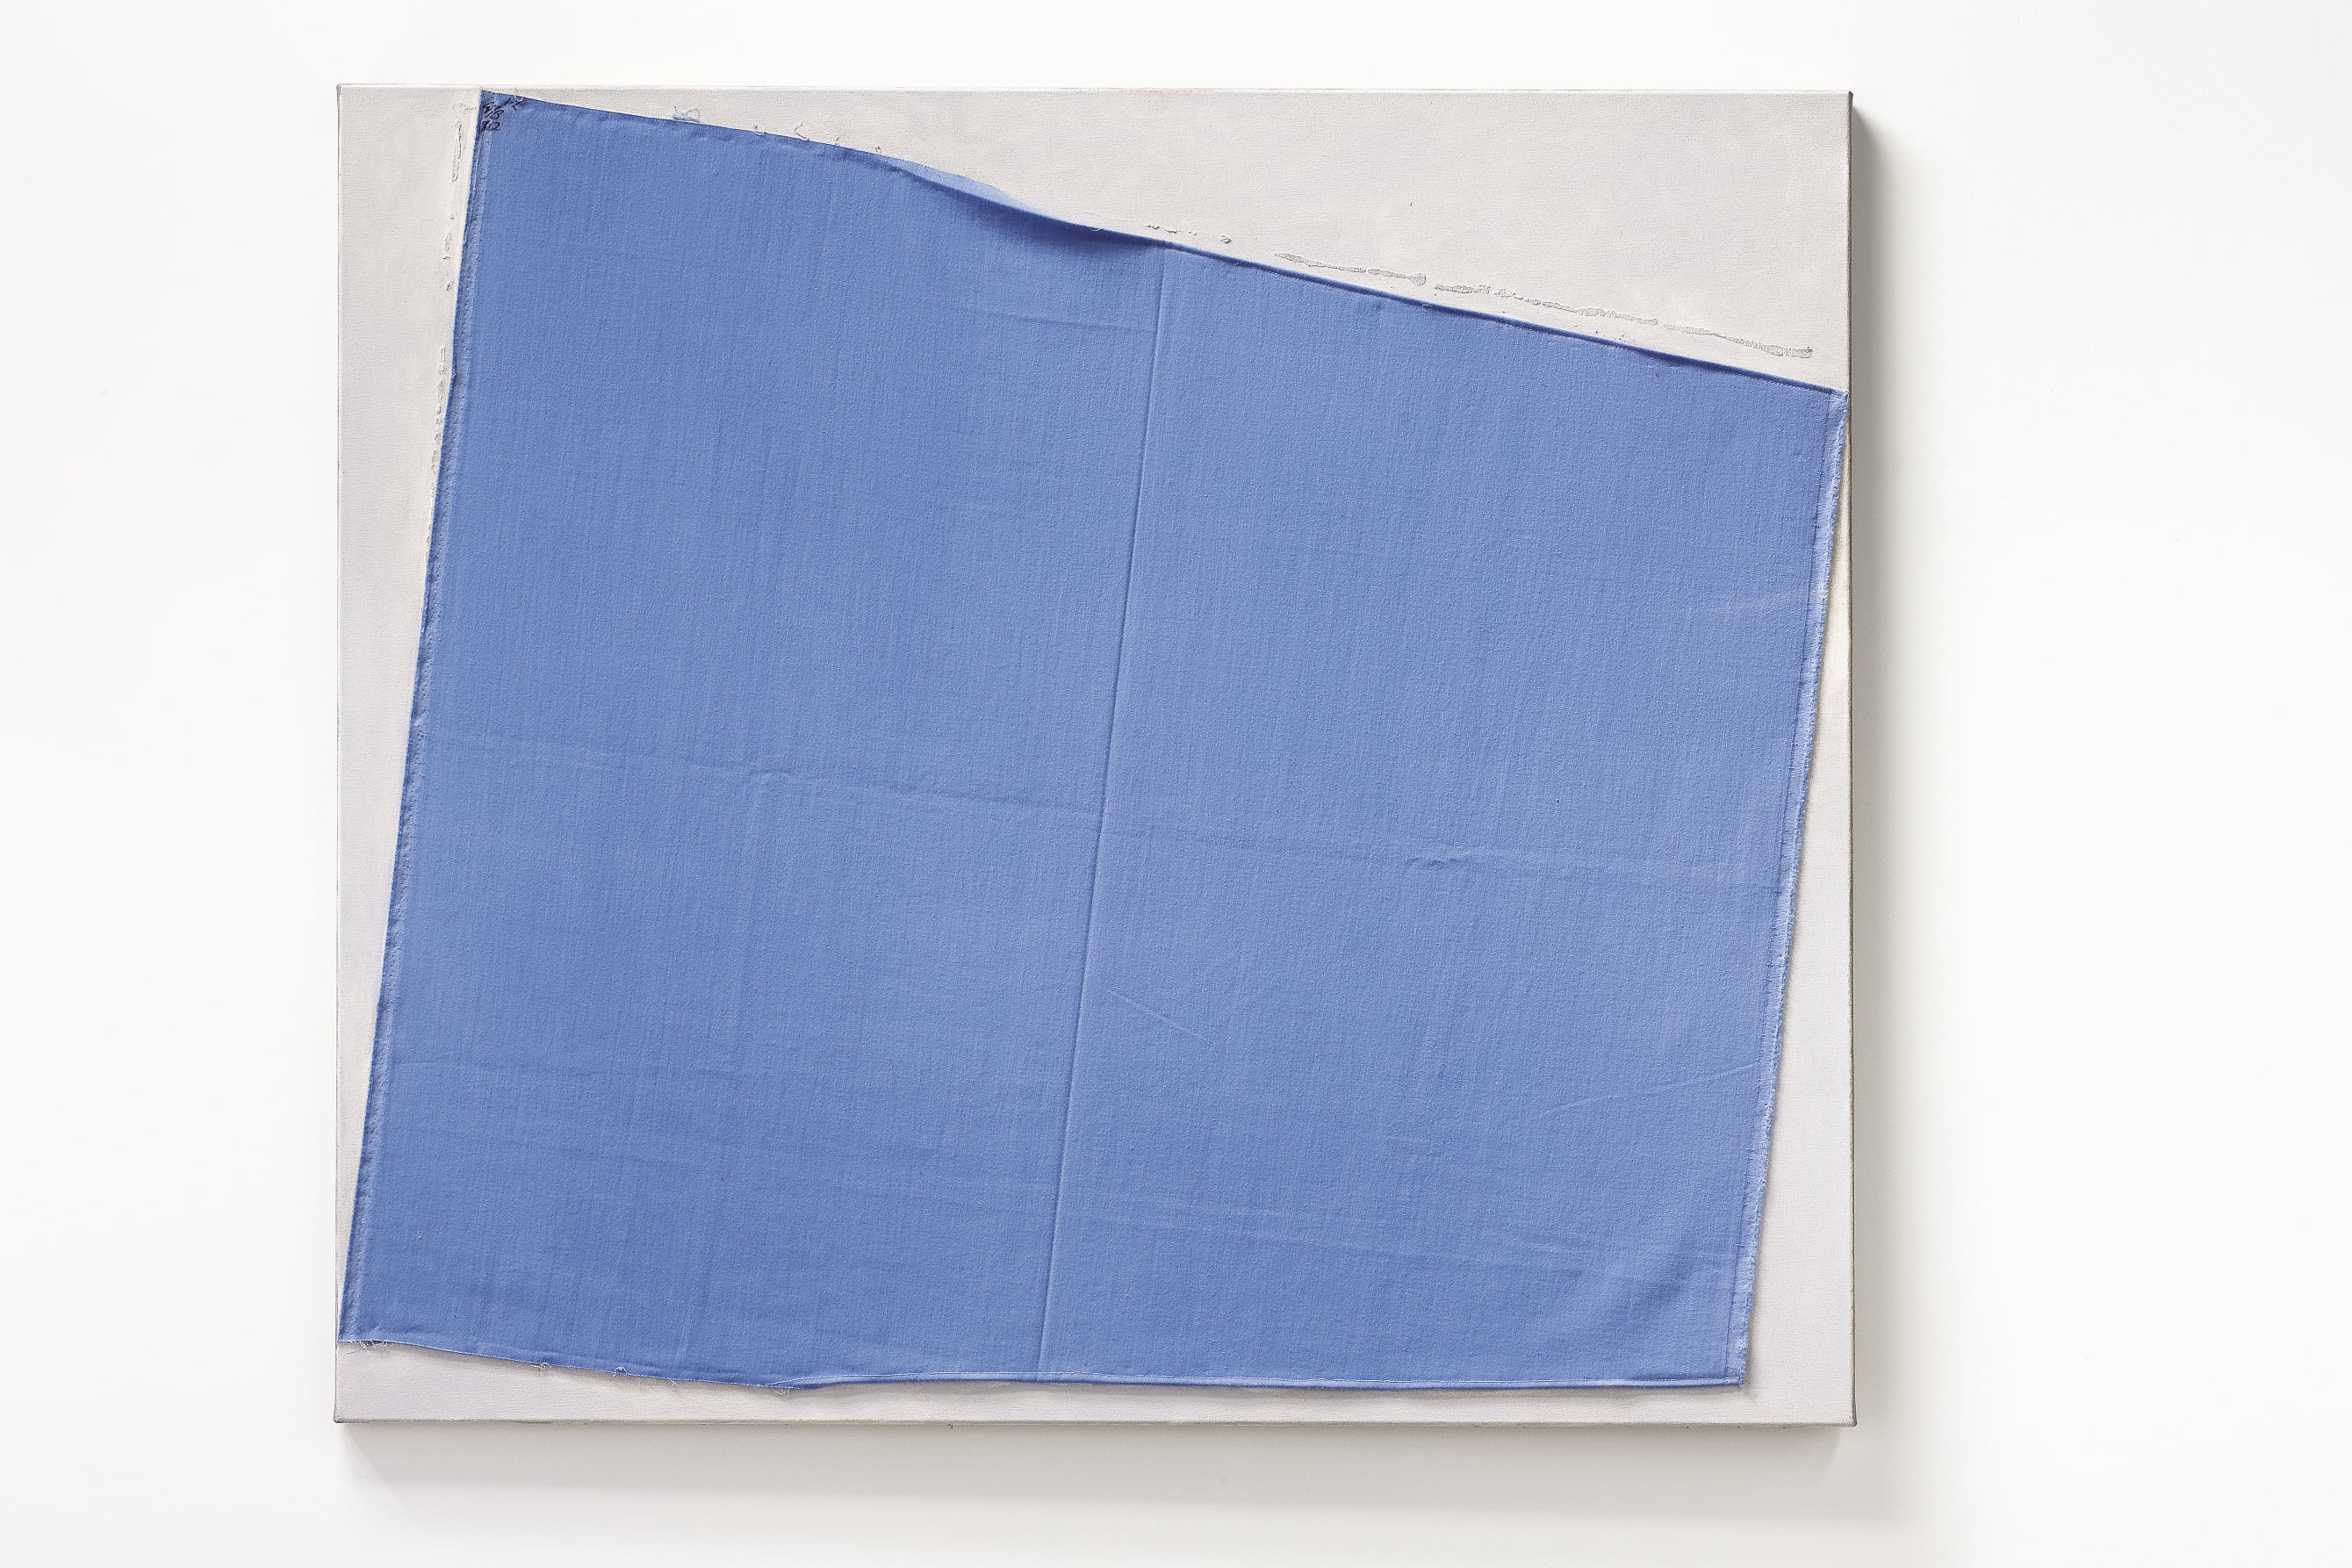 Elizabeth Newman, <em>Untitled</em> 2005–2009, fabric and oil paint on canvas, Image courtesy the artist and Neon Parc, Melbourne, Photo credit: Mark Ashkanasy